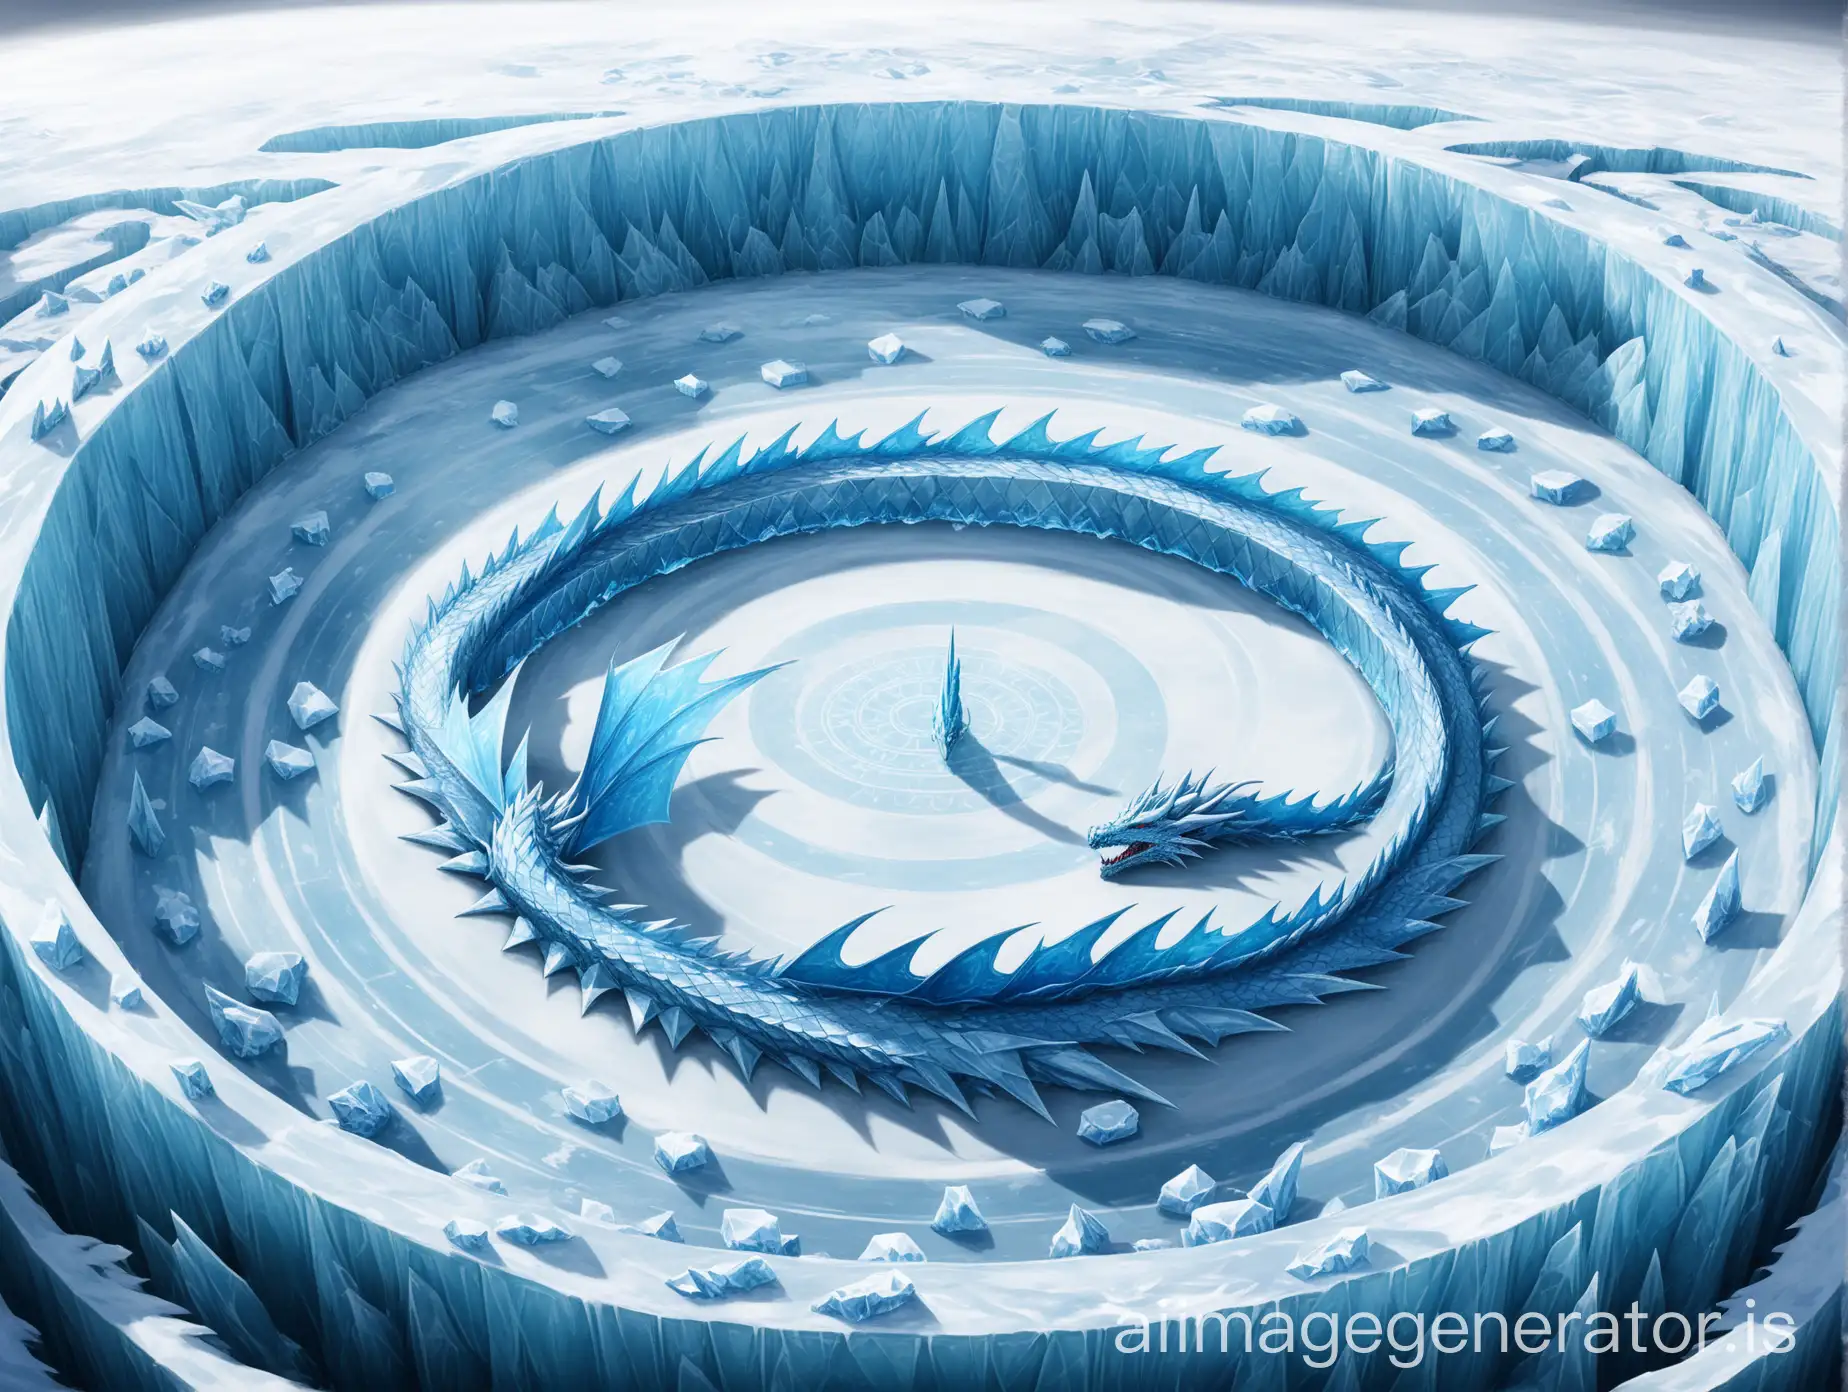 The ice dragon surrounds the ice circle, and there are scattered ice ice dragons outside the circle.